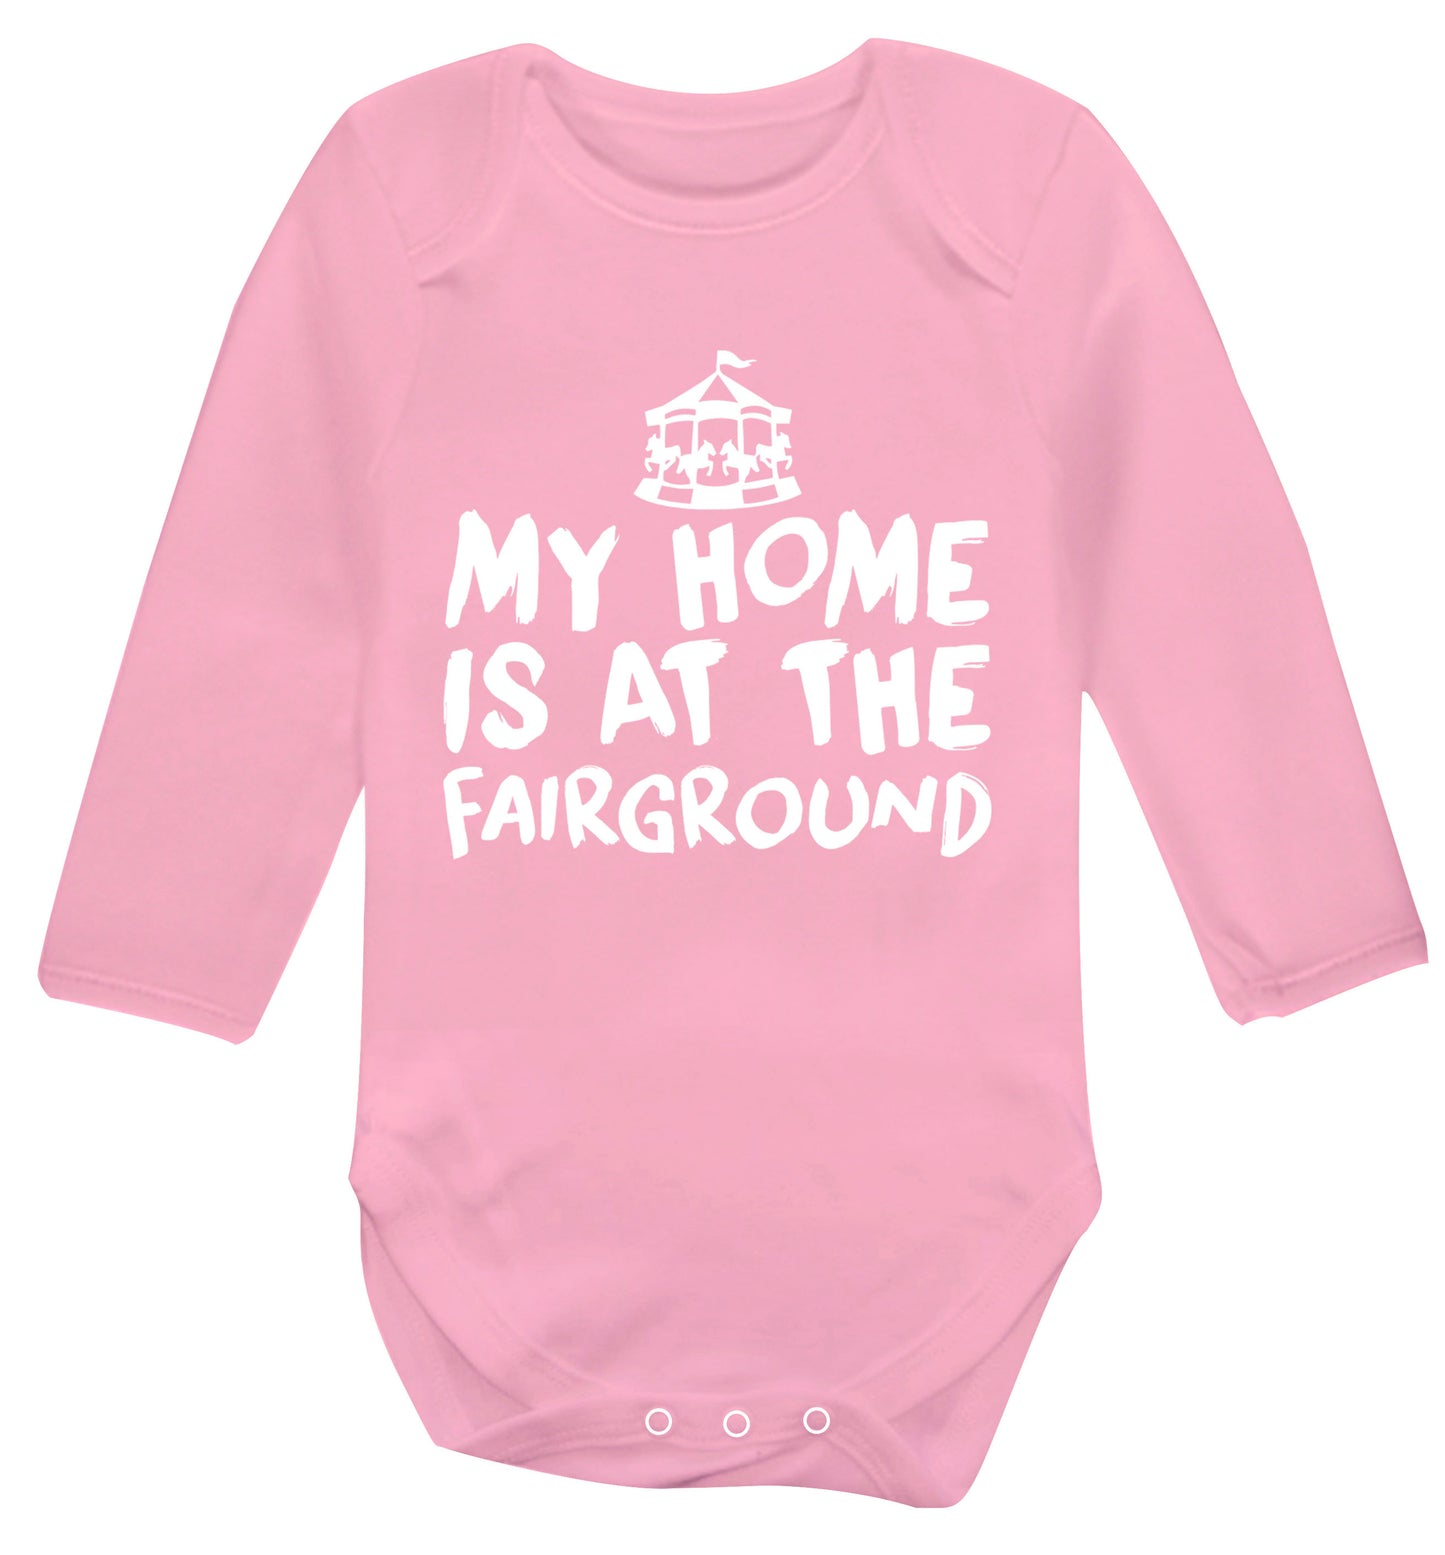 My home is at the fairground Baby Vest long sleeved pale pink 6-12 months